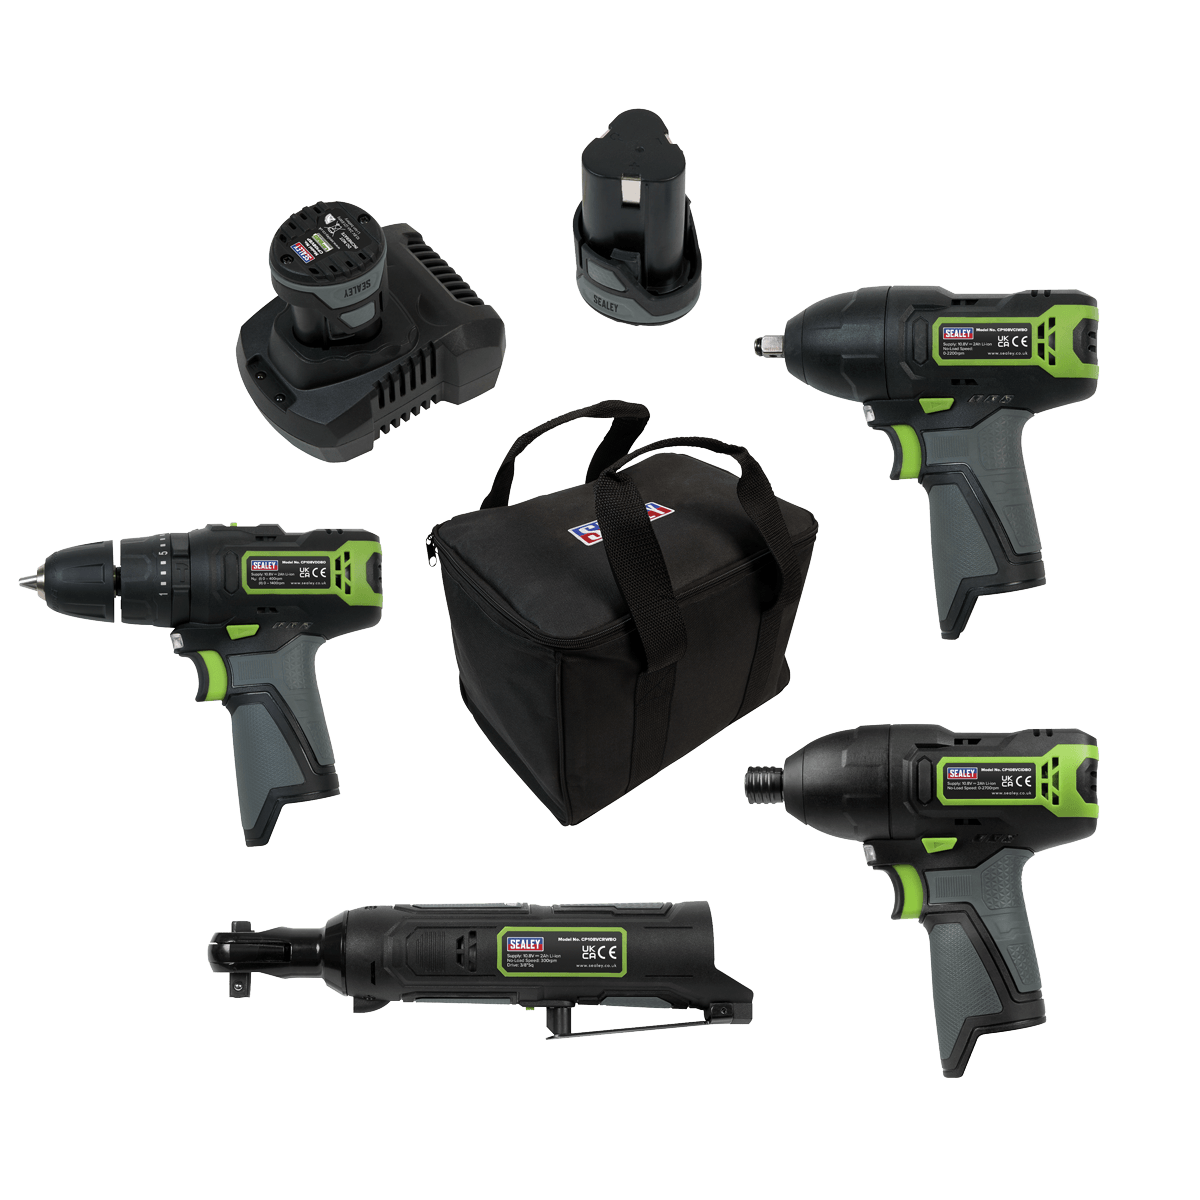 Sealey 4 x 10.8V SV10.8 Series Cordless Combo Kit - 2 Batteries - Drill, ratchet, Impact Driver & Wrench CP108VCOMBO2 - Tools 2U Direct SW